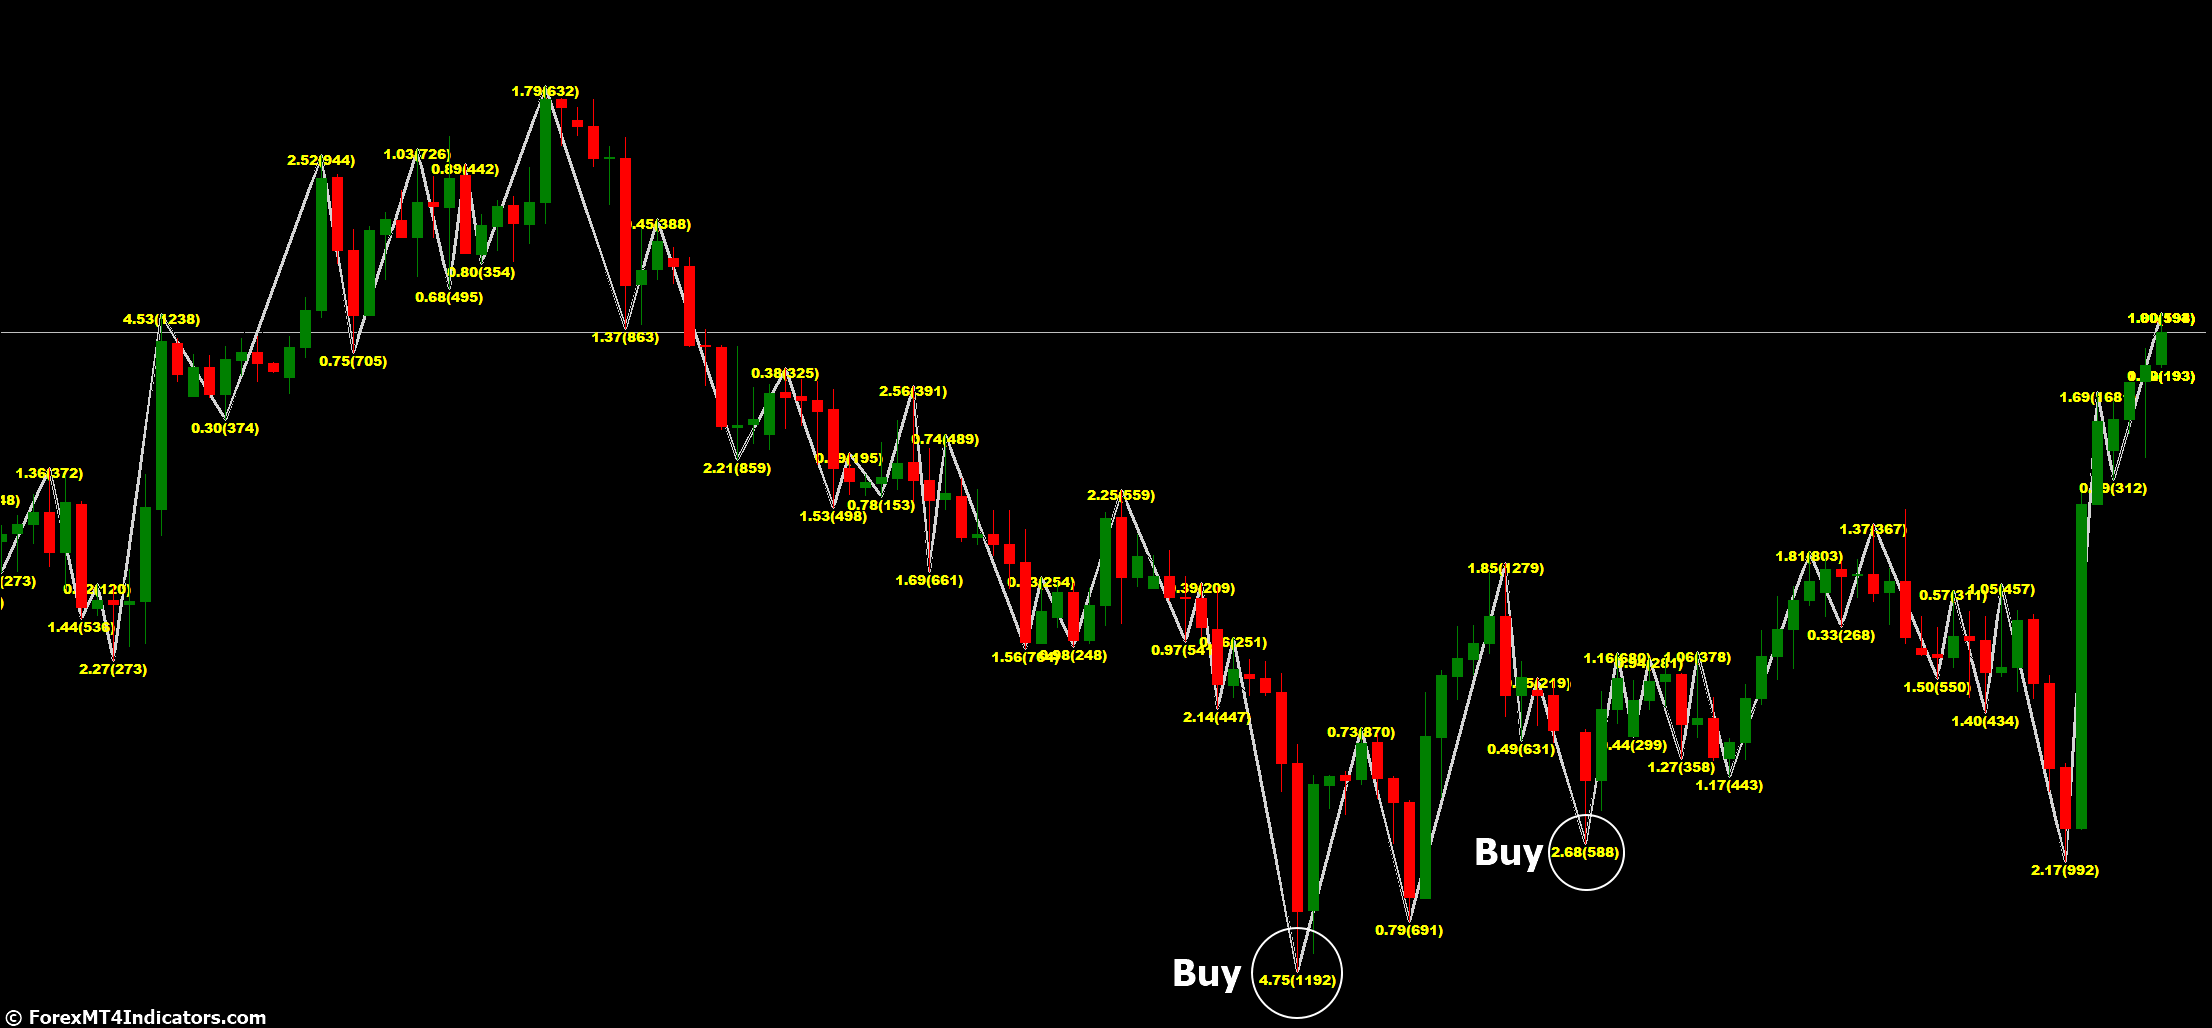 How to Trade with Channel ZZ MT4 Indicator - Buy Entry